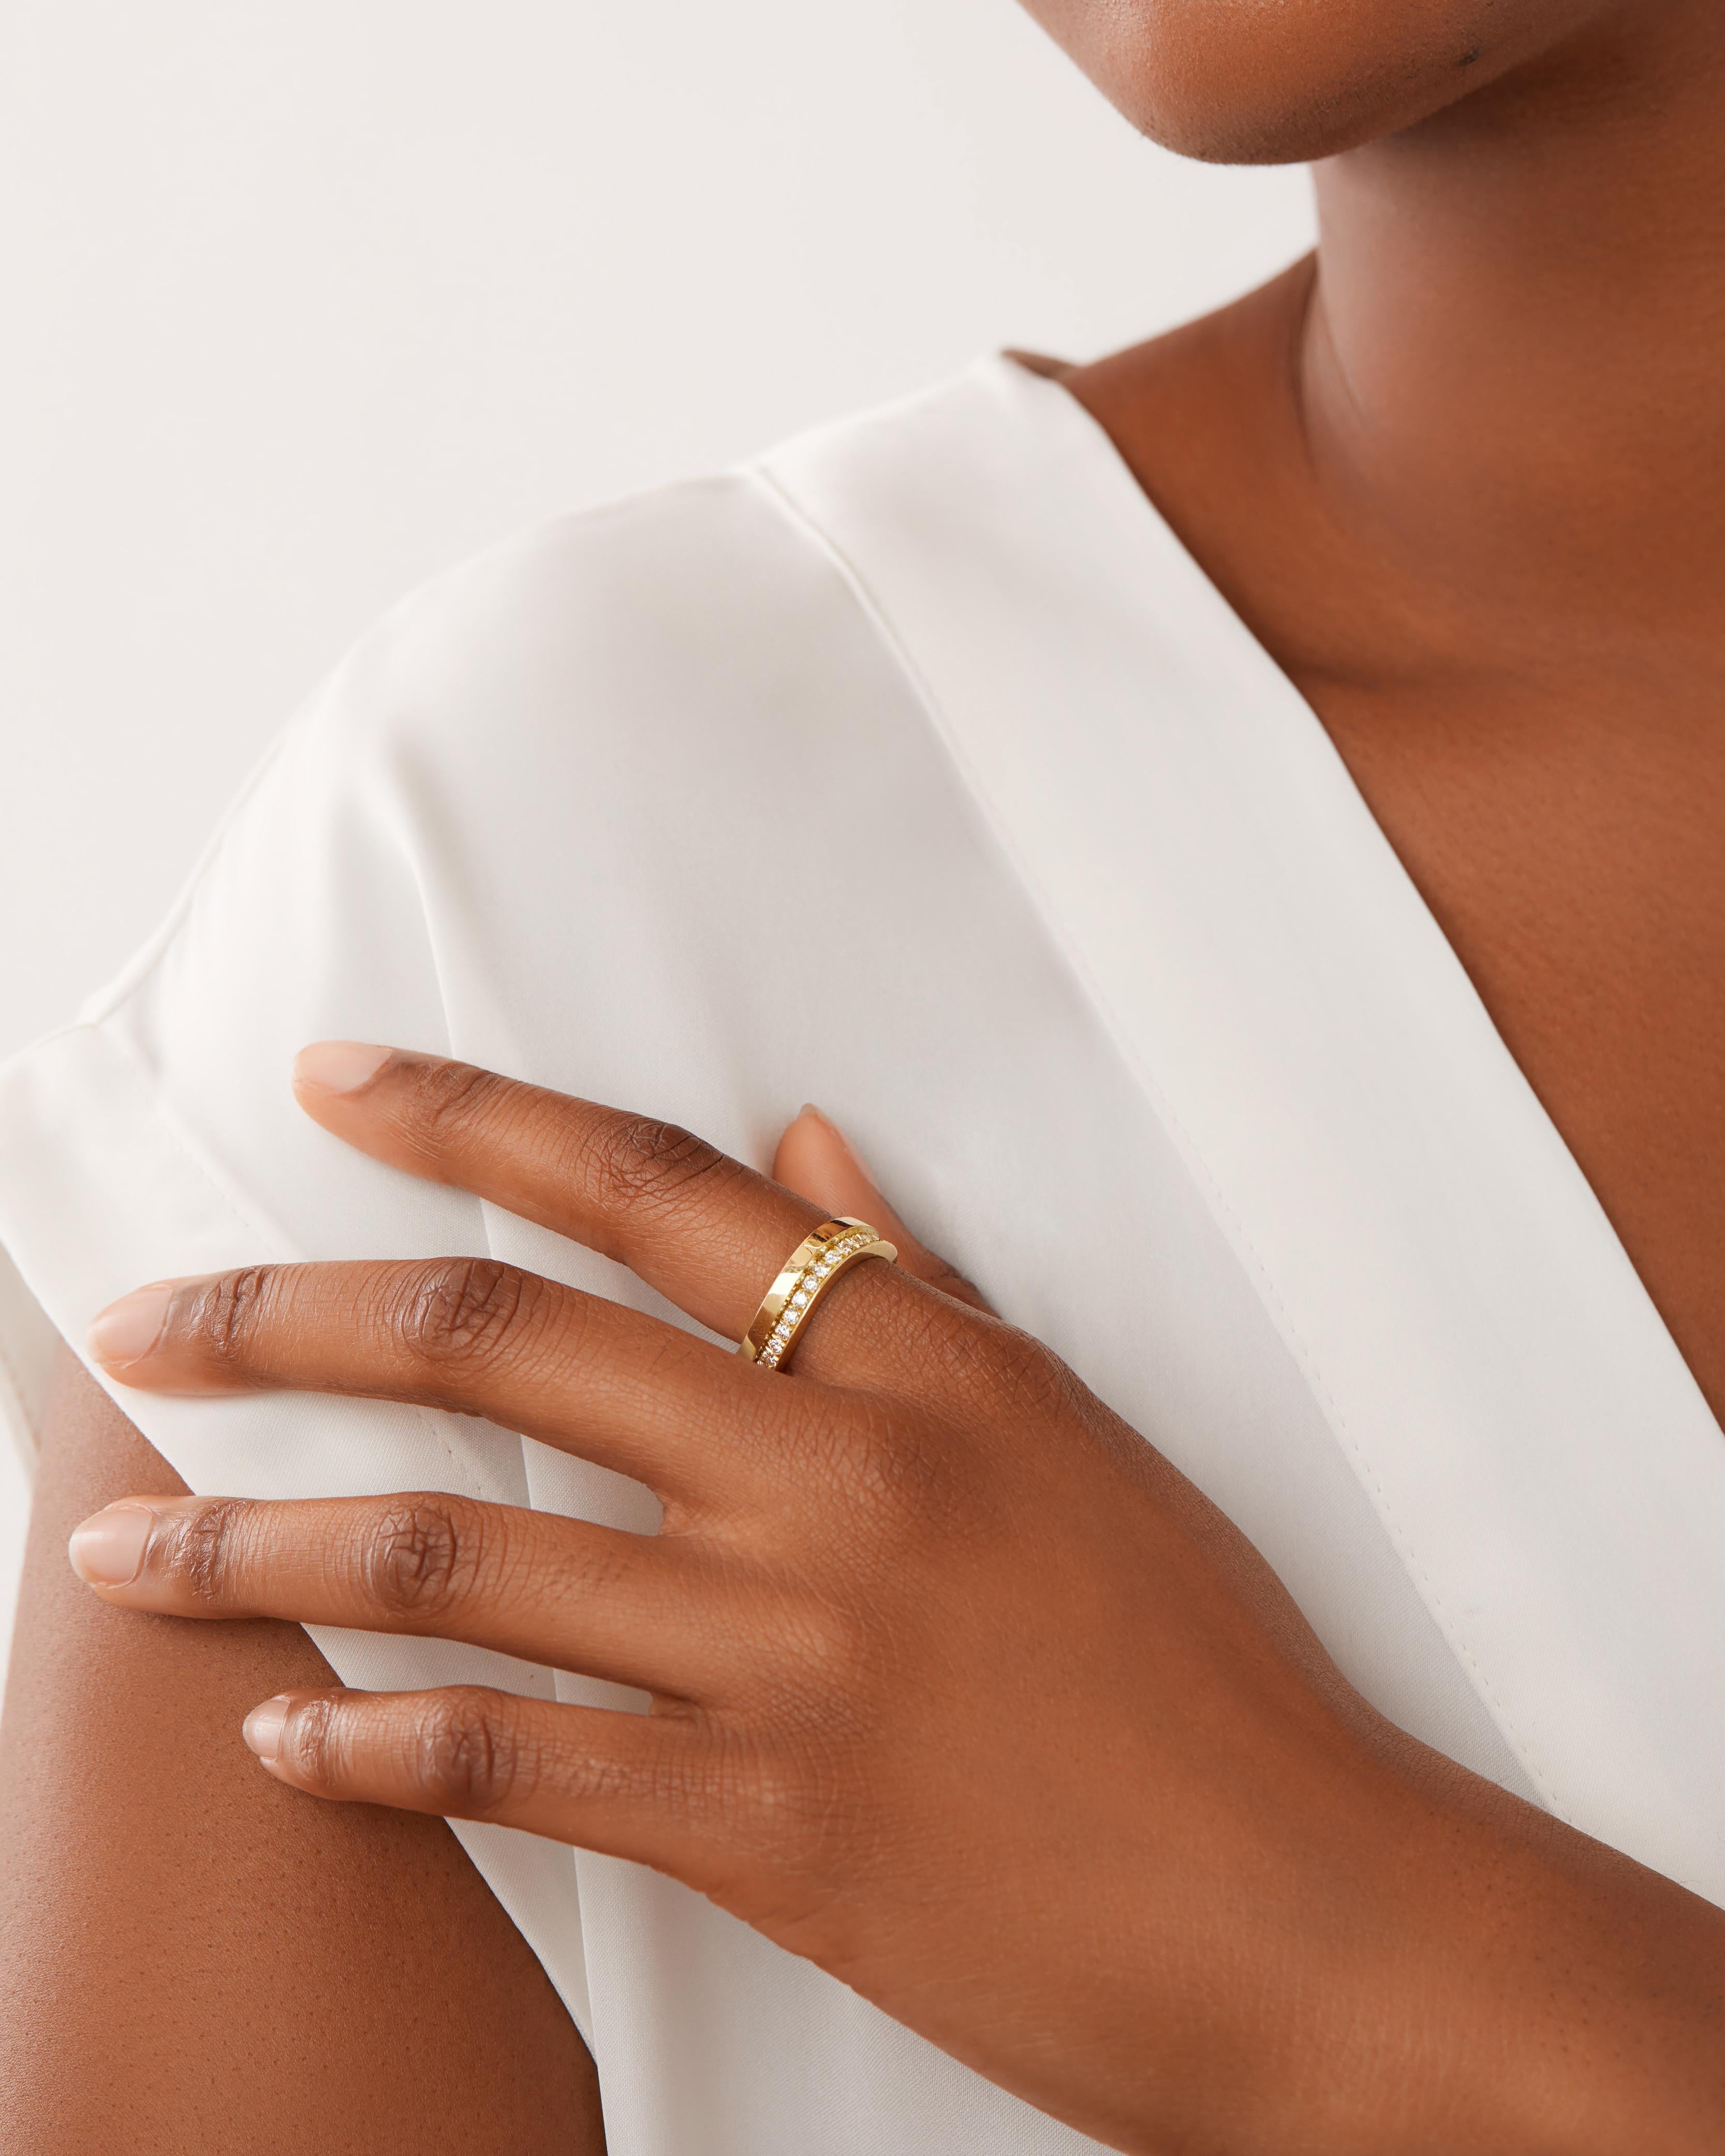 This 18K yellow gold ring features a modern tiered detail set with brilliant cut diamonds all the way around the band. Wear it alone or as multiples, the ring is designed to stack perfectly.